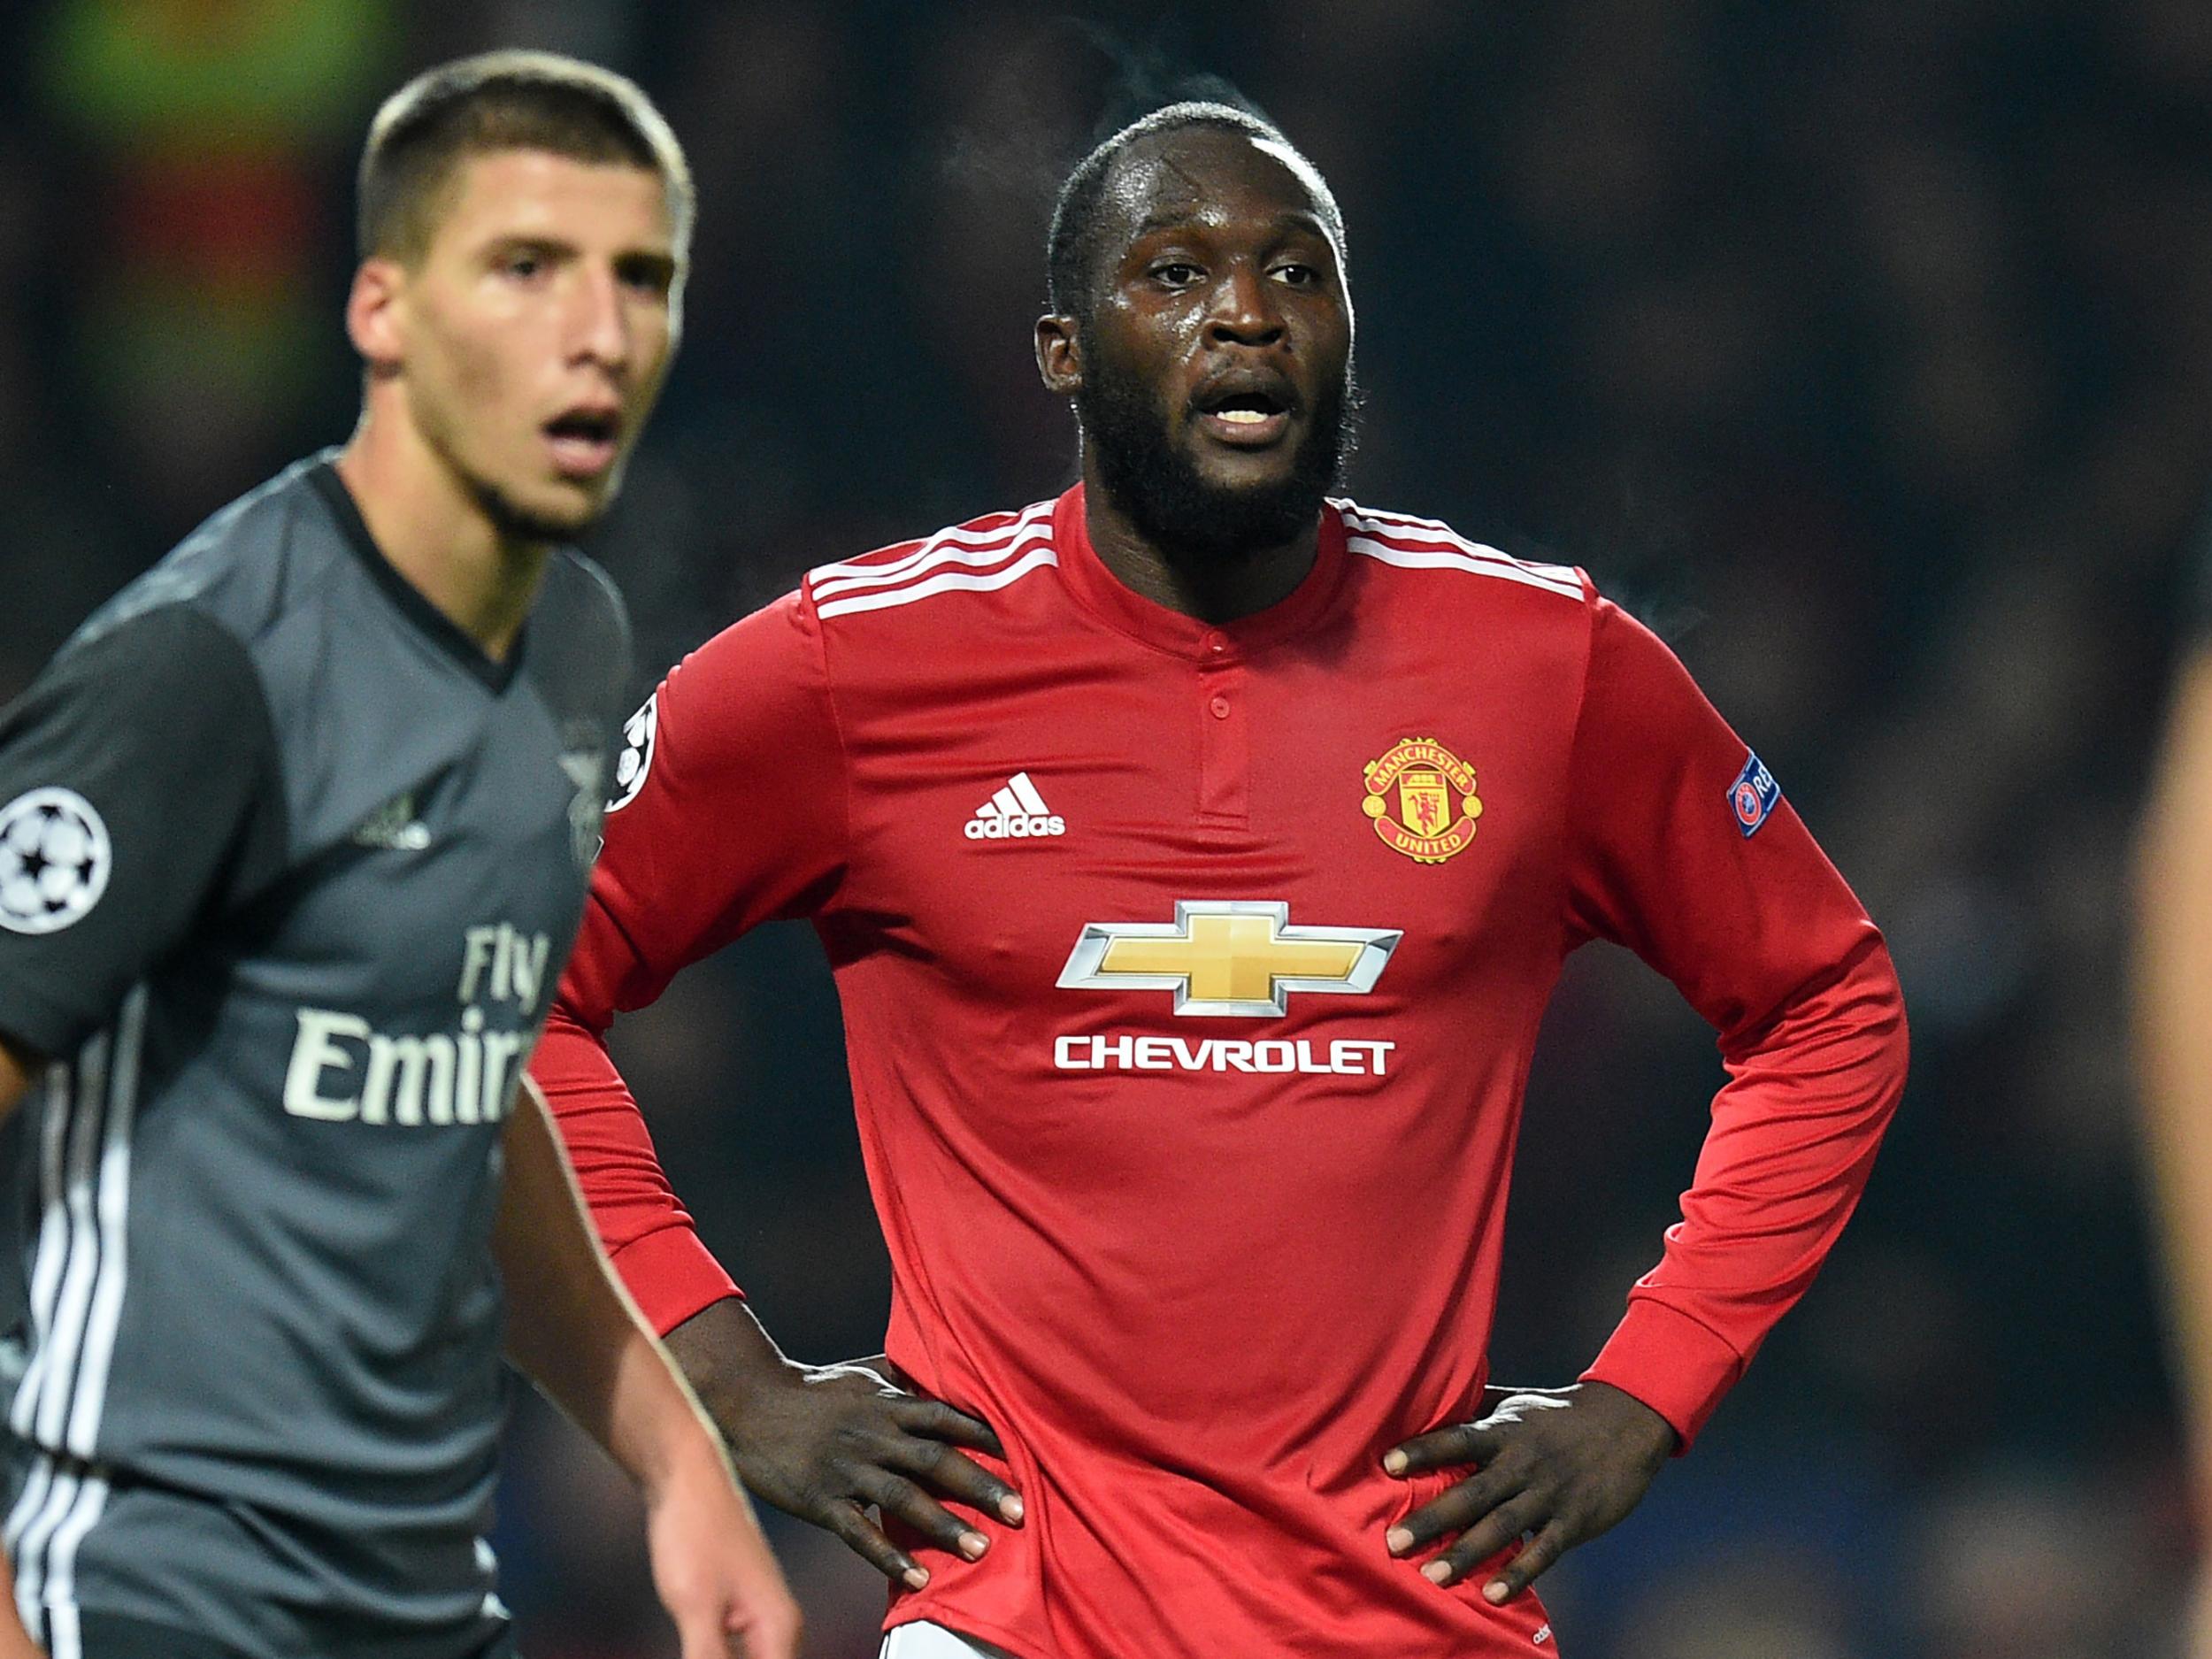 Romelu Lukaku went without a goal for the sixth game running on Tuesday night